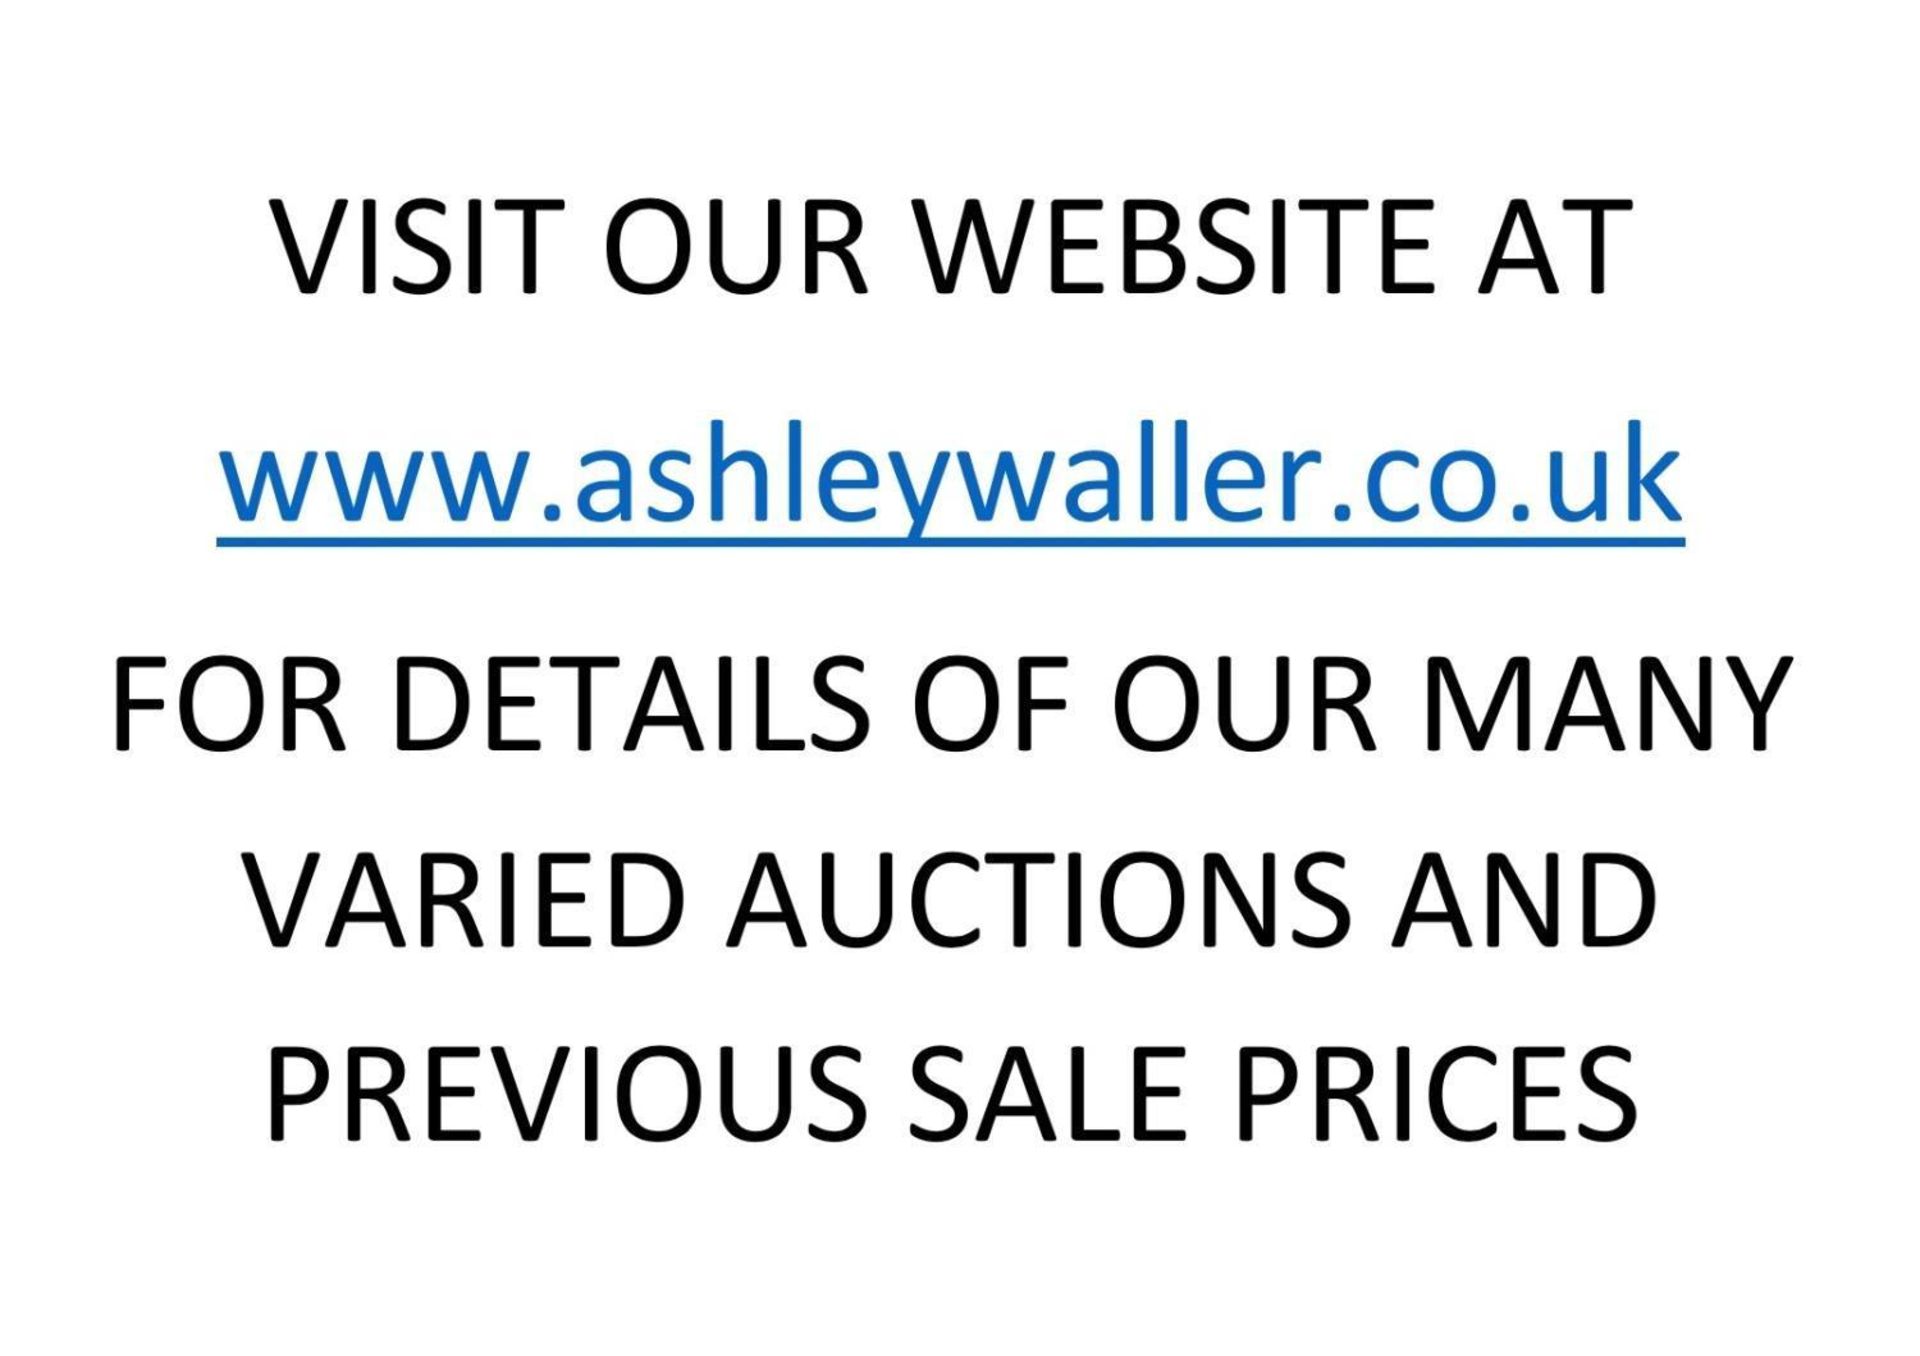 END OF SALE, THANK YOU FOR YOUR ATTENDANCE AND BIDDING - OUR NEXT AUCTION IS ON THURSDAY 10TH